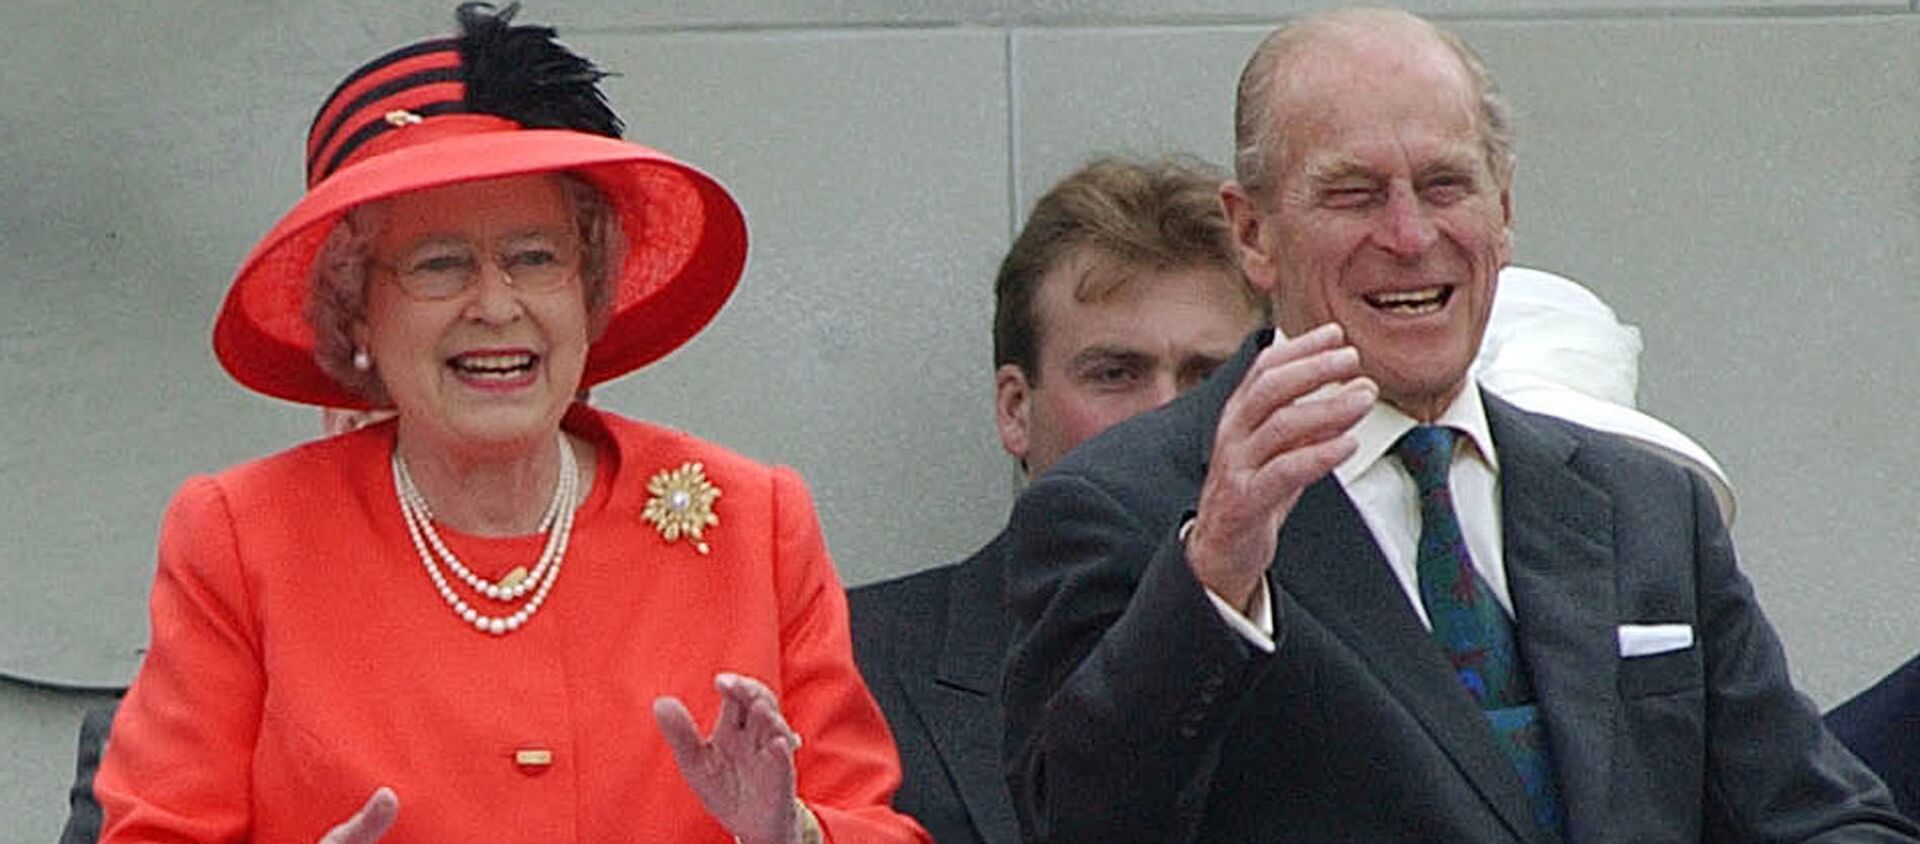 Britain's Queen Elizabeth II laughs with her husband, Prince Philip, as they watch a parade in The Mall in London Tuesday, June 4, 2002, as part of the Golden Jubilee celebrations.  - Sputnik International, 1920, 09.04.2021